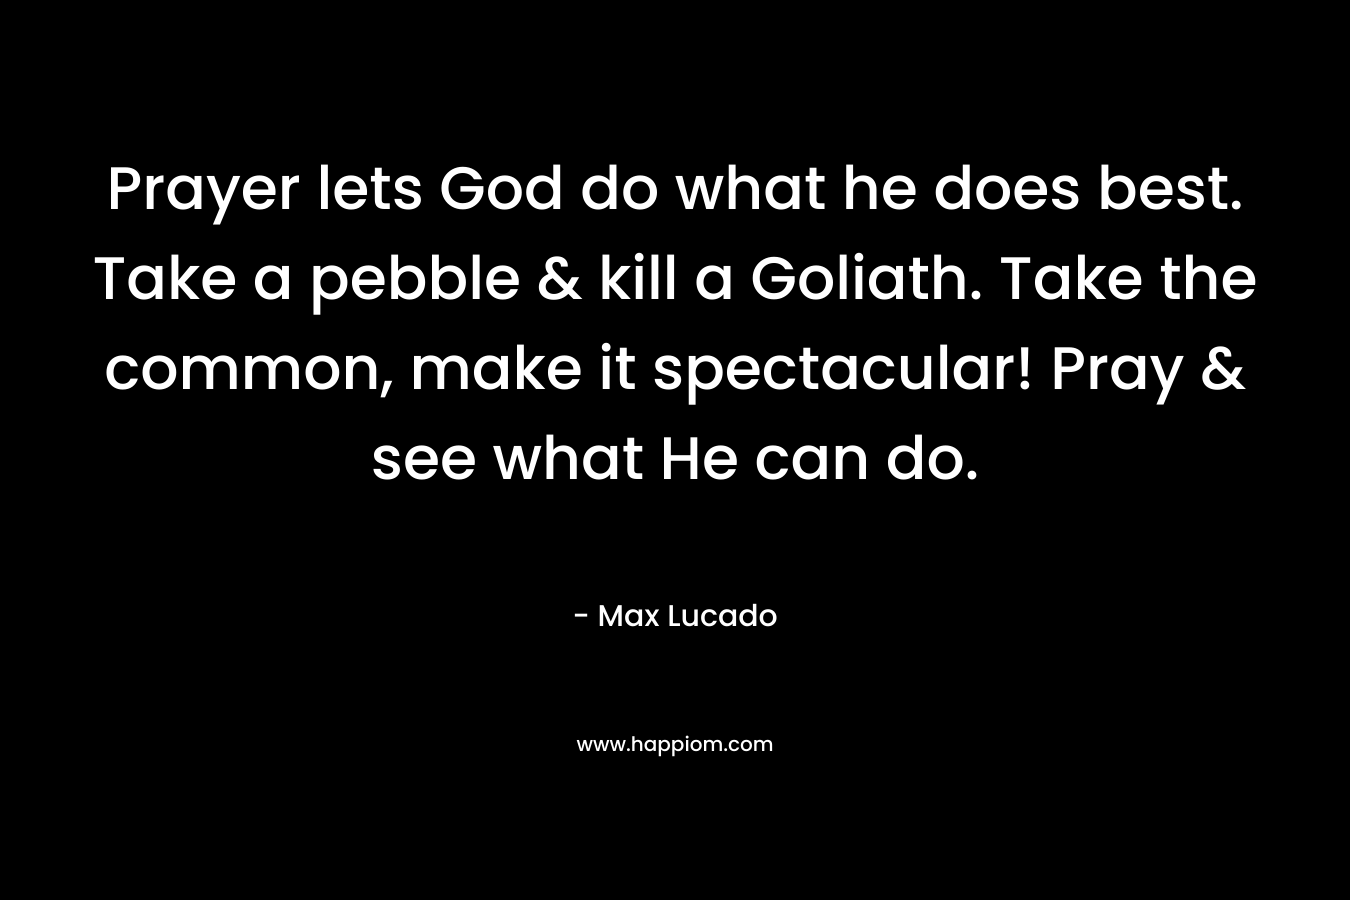 Prayer lets God do what he does best. Take a pebble & kill a Goliath. Take the common, make it spectacular! Pray & see what He can do. – Max Lucado